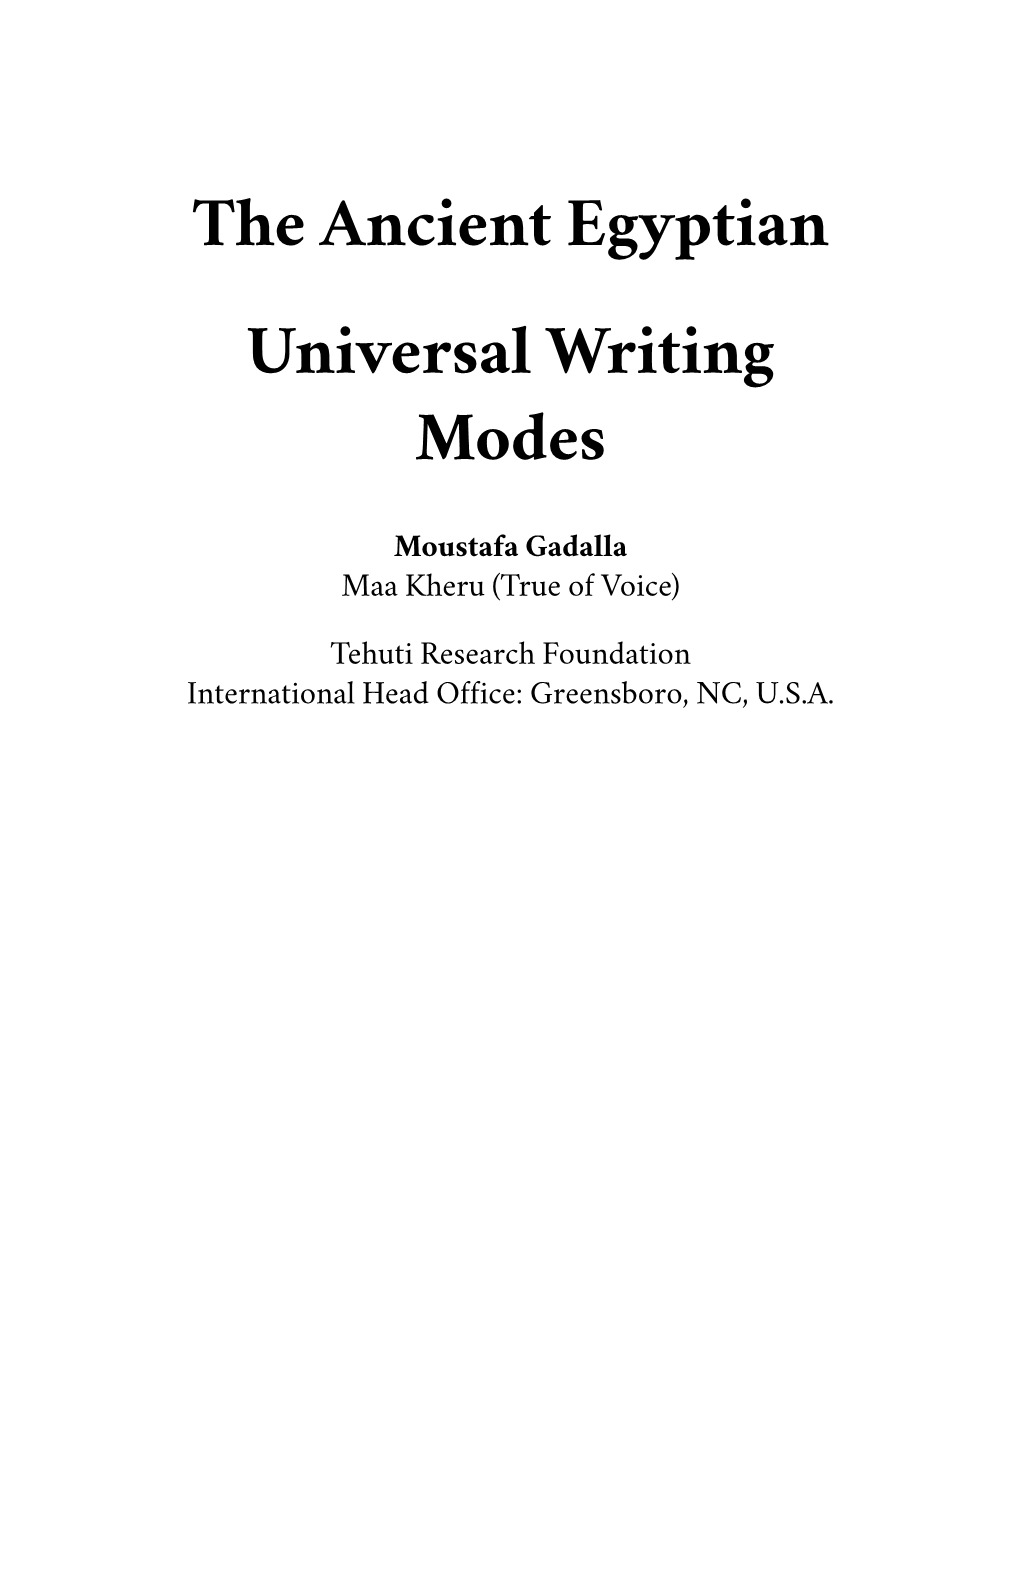 The Ancient Egyptian Universal Writing Modes by Moustafa Gadalla